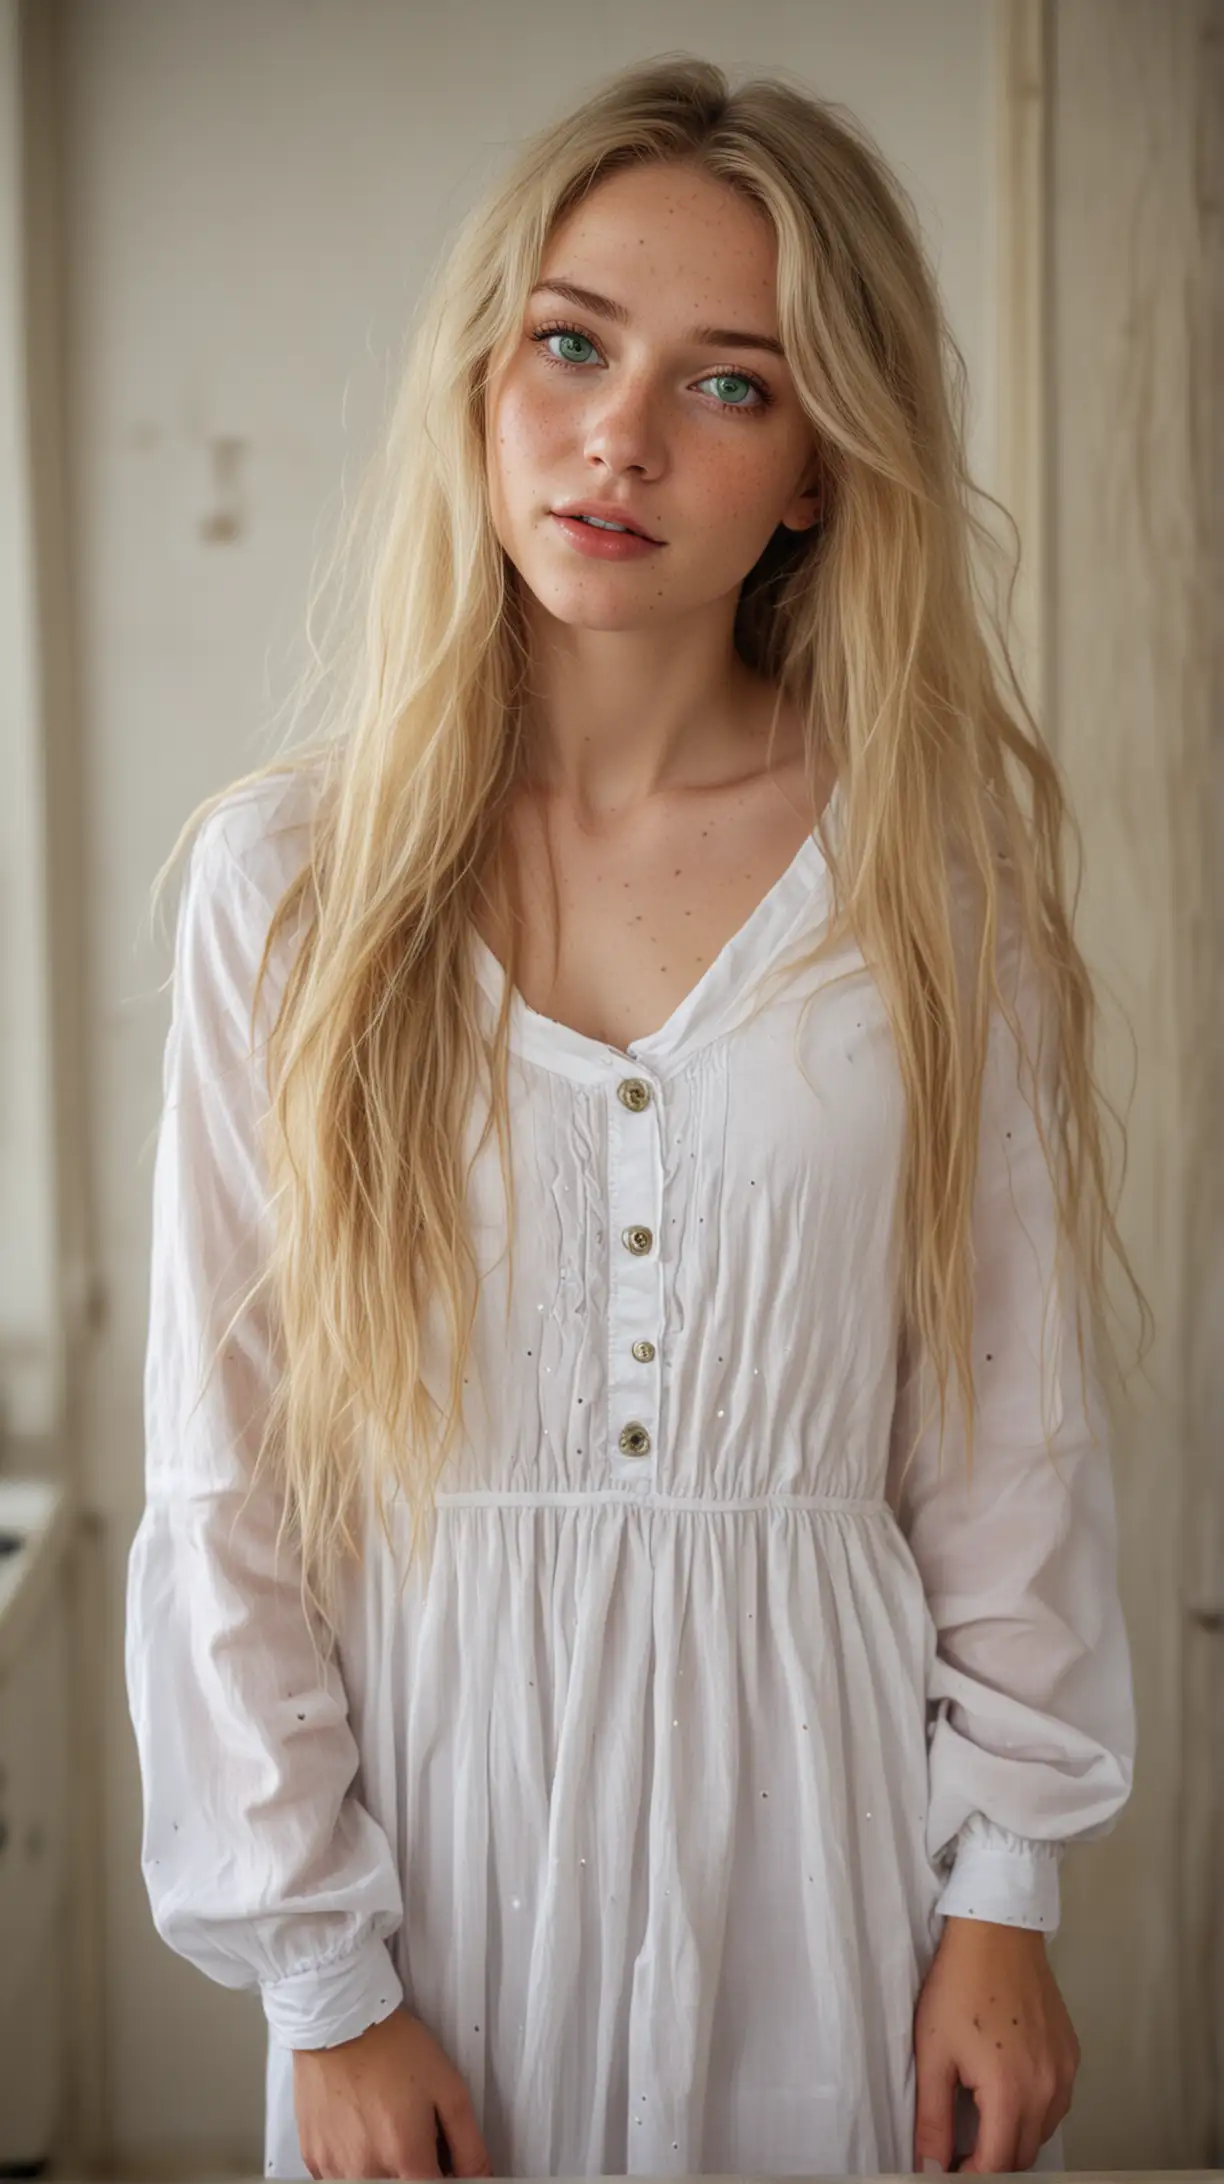 Blonde Woman with Long Hair in White Dress Standing in Apartment